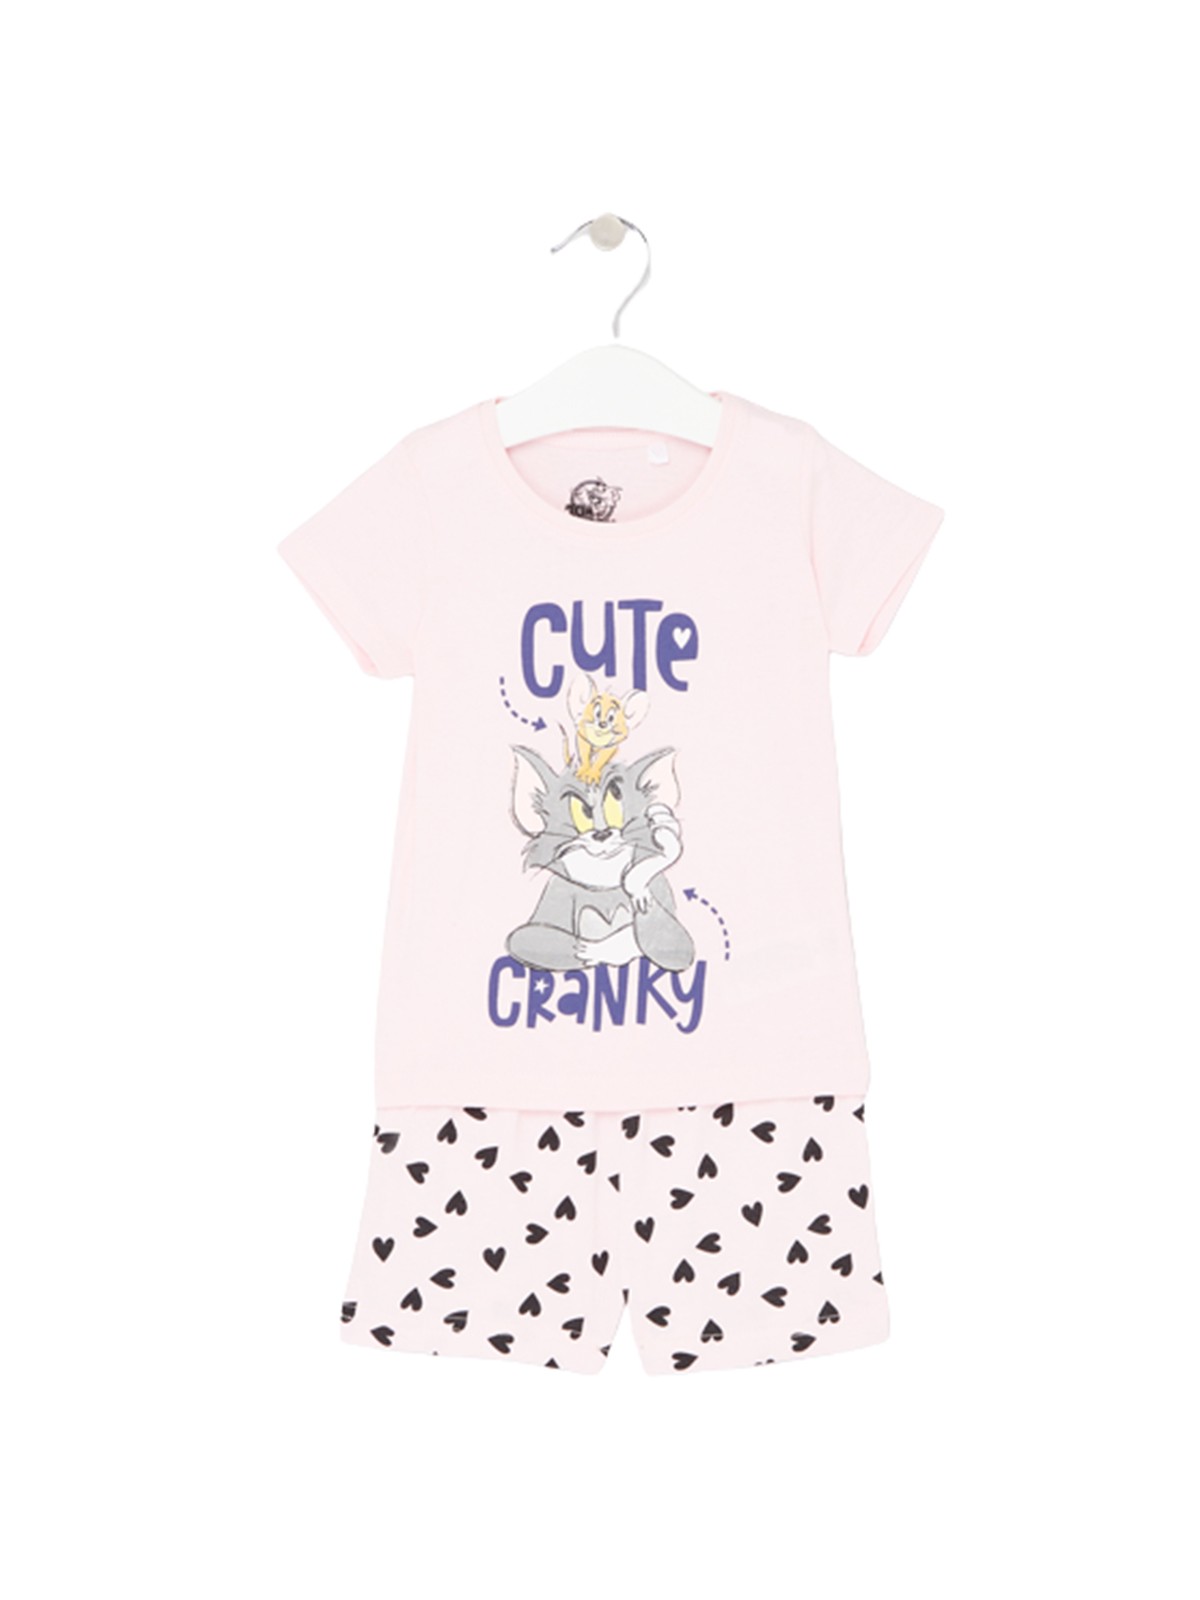 Tom et Jerry Clothing of 2 pieces